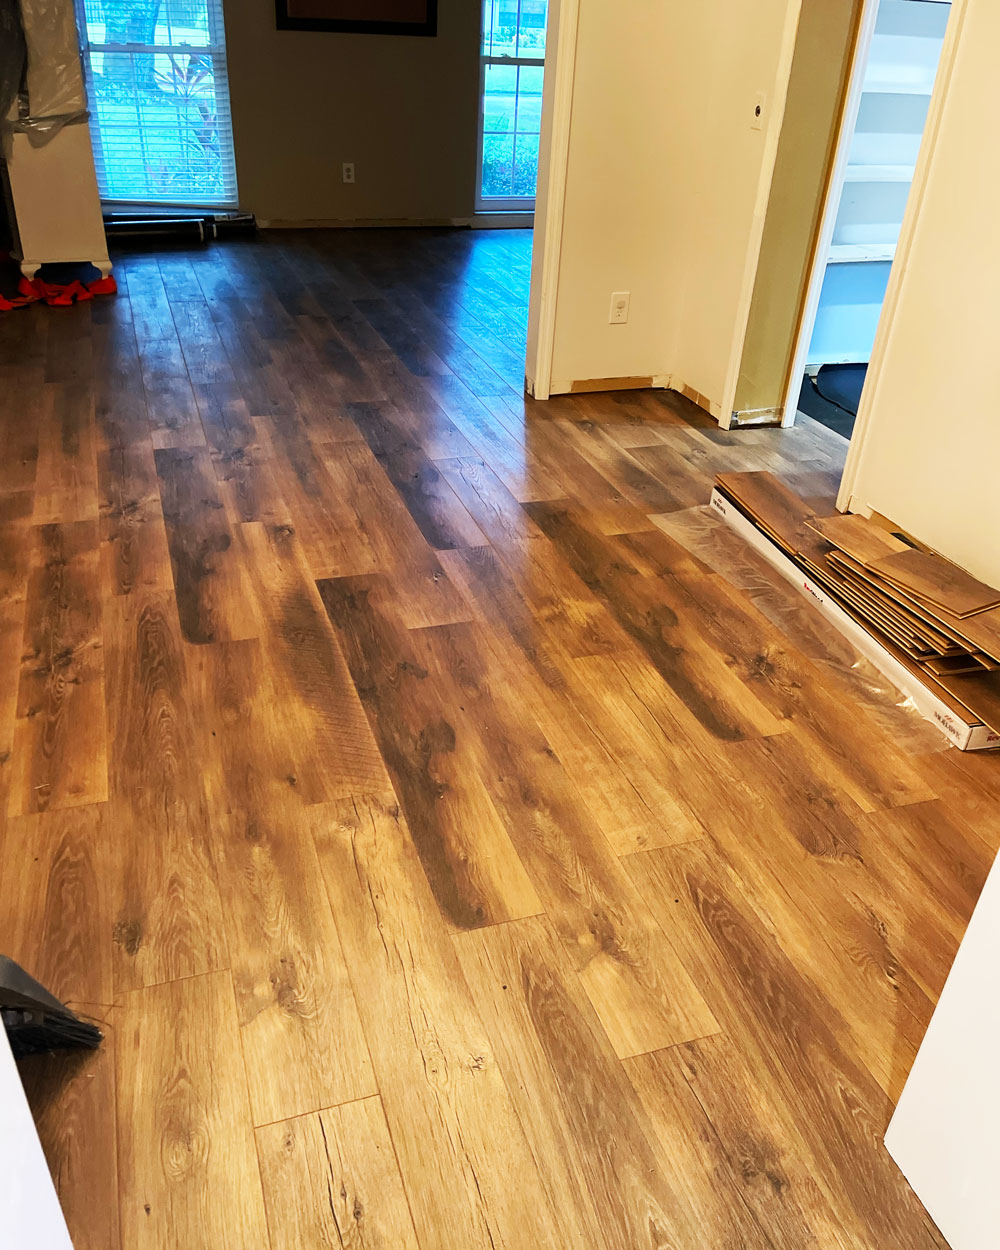 Hardwood floors and planks in house